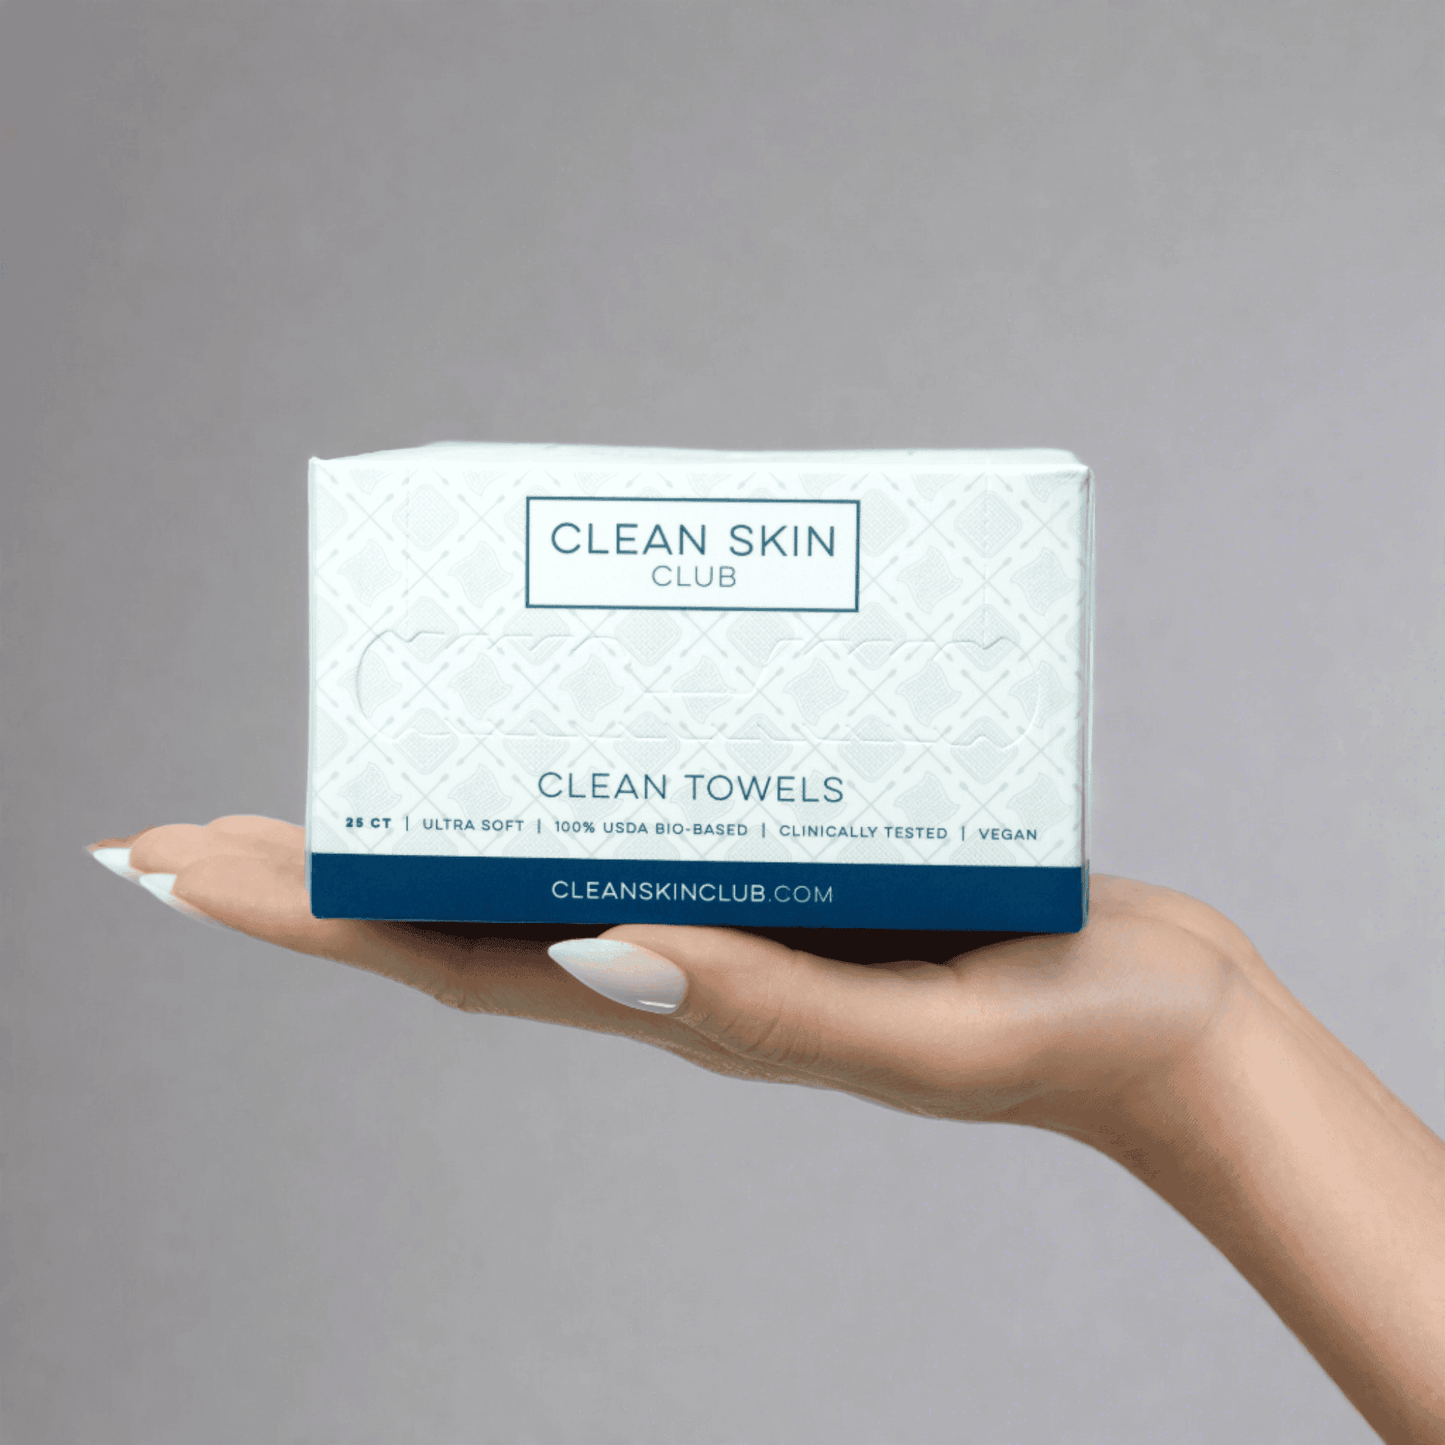 Clean Skin Facial Travel Box - Premium skincare essentials for on-the-go cleansing and hydration.